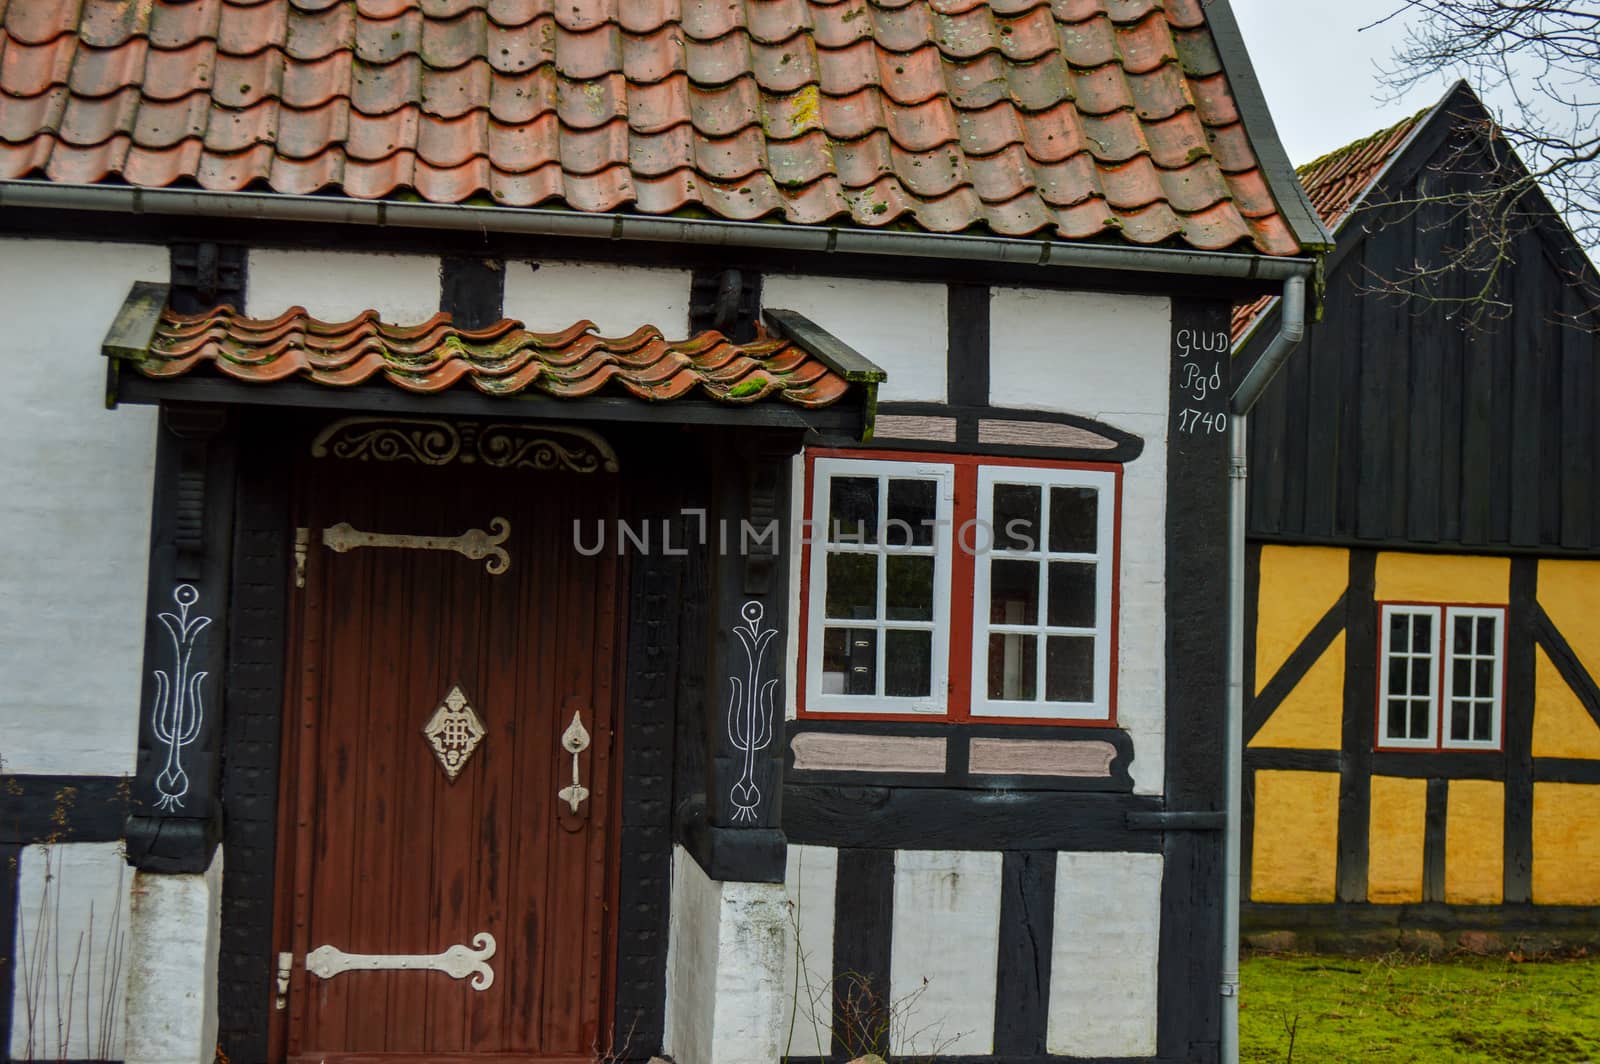 Half-Timbered Houses by Mads_Hjorth_Jakobsen